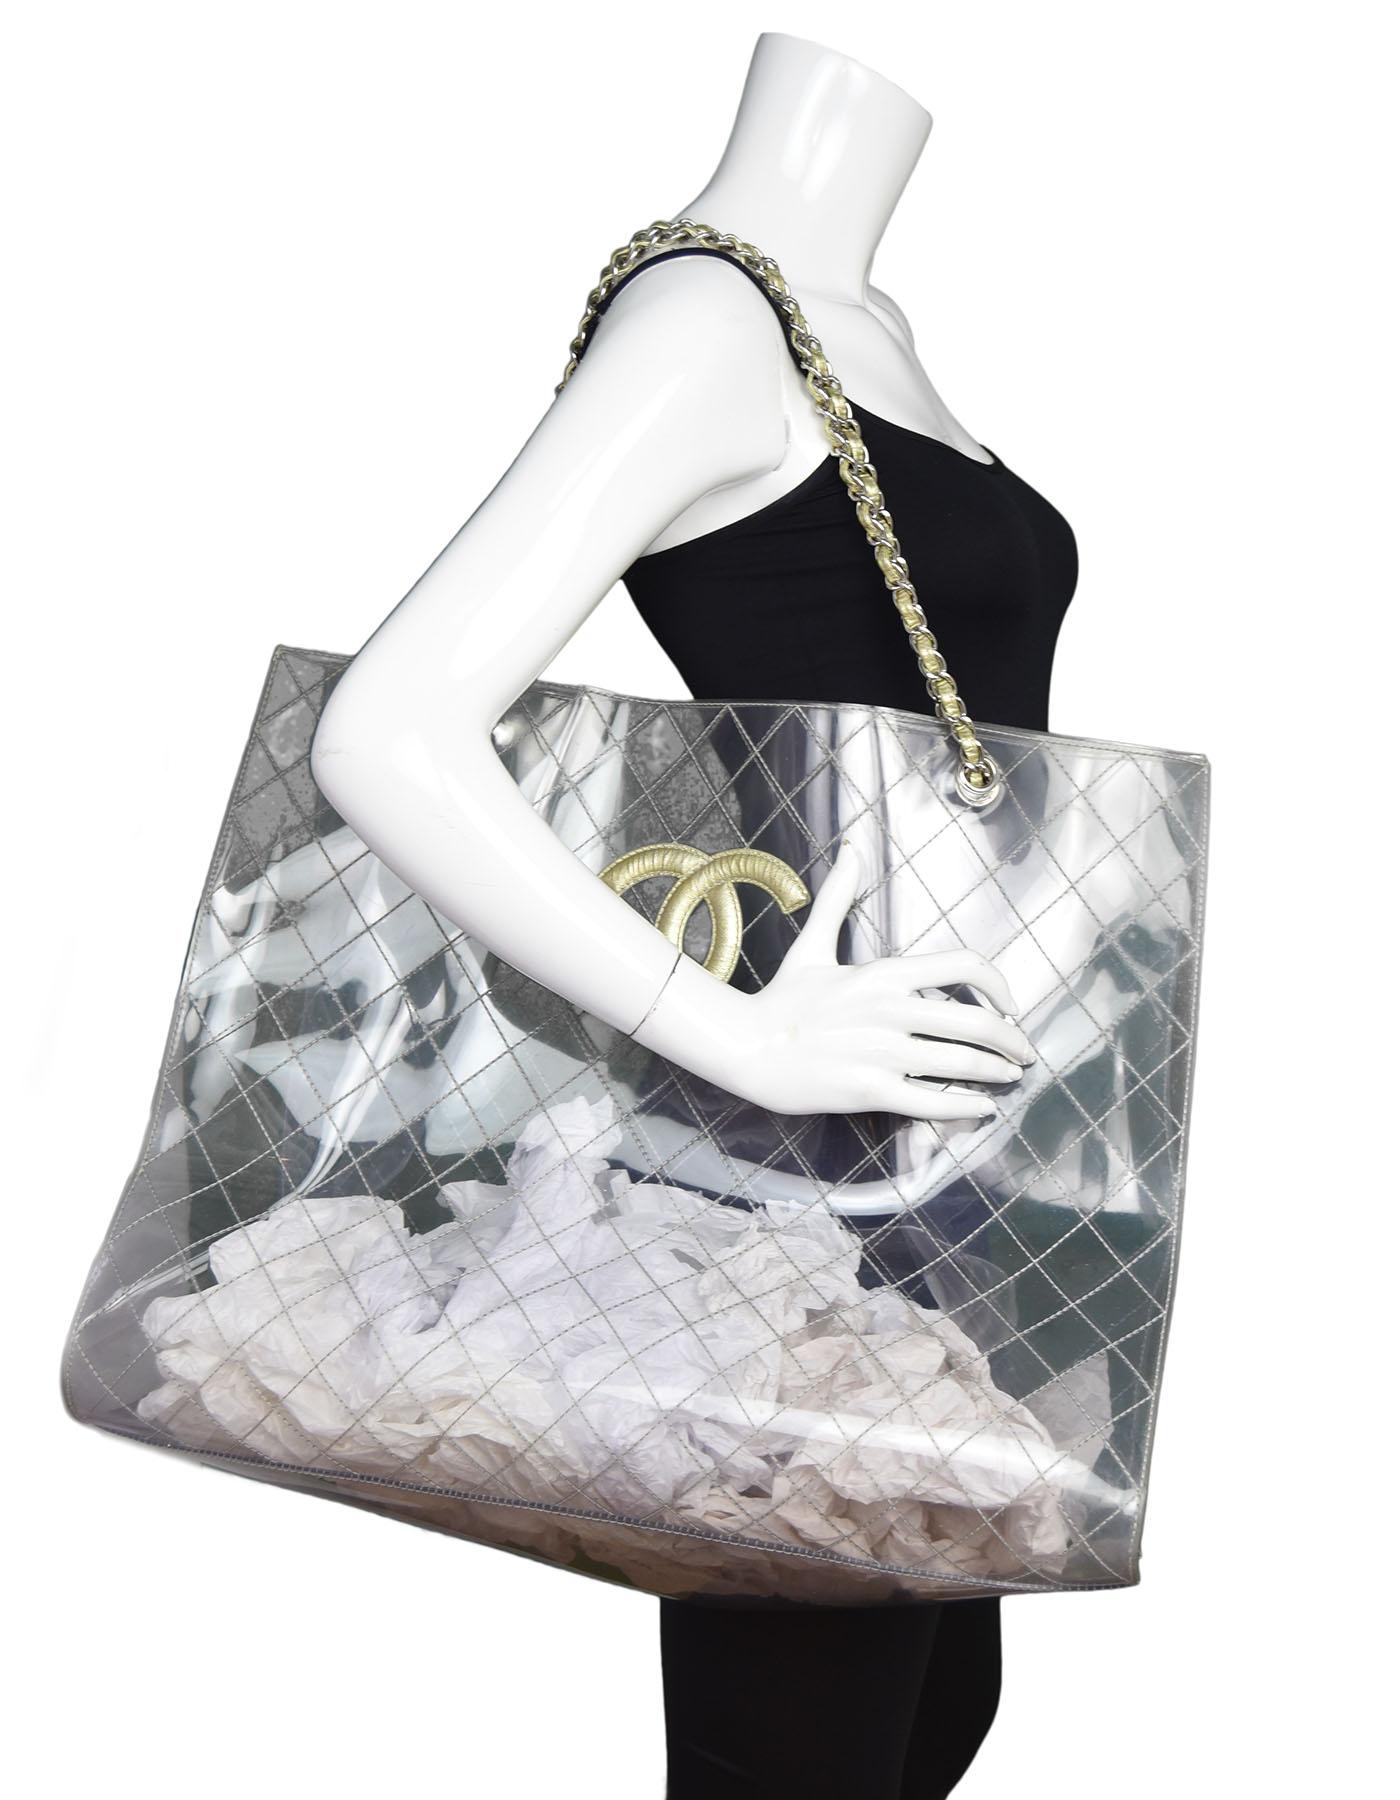 Chanel Clear Quilted PVC XXL CC Tote

Made In: France
Year of Production: 2006-2008
Color: Clear, gold, silver
Hardware: Silvertone
Materials: PVC, leather, metal
Lining: None
Closure/opening: Open top
Exterior Pockets: None
Interior Pockets: